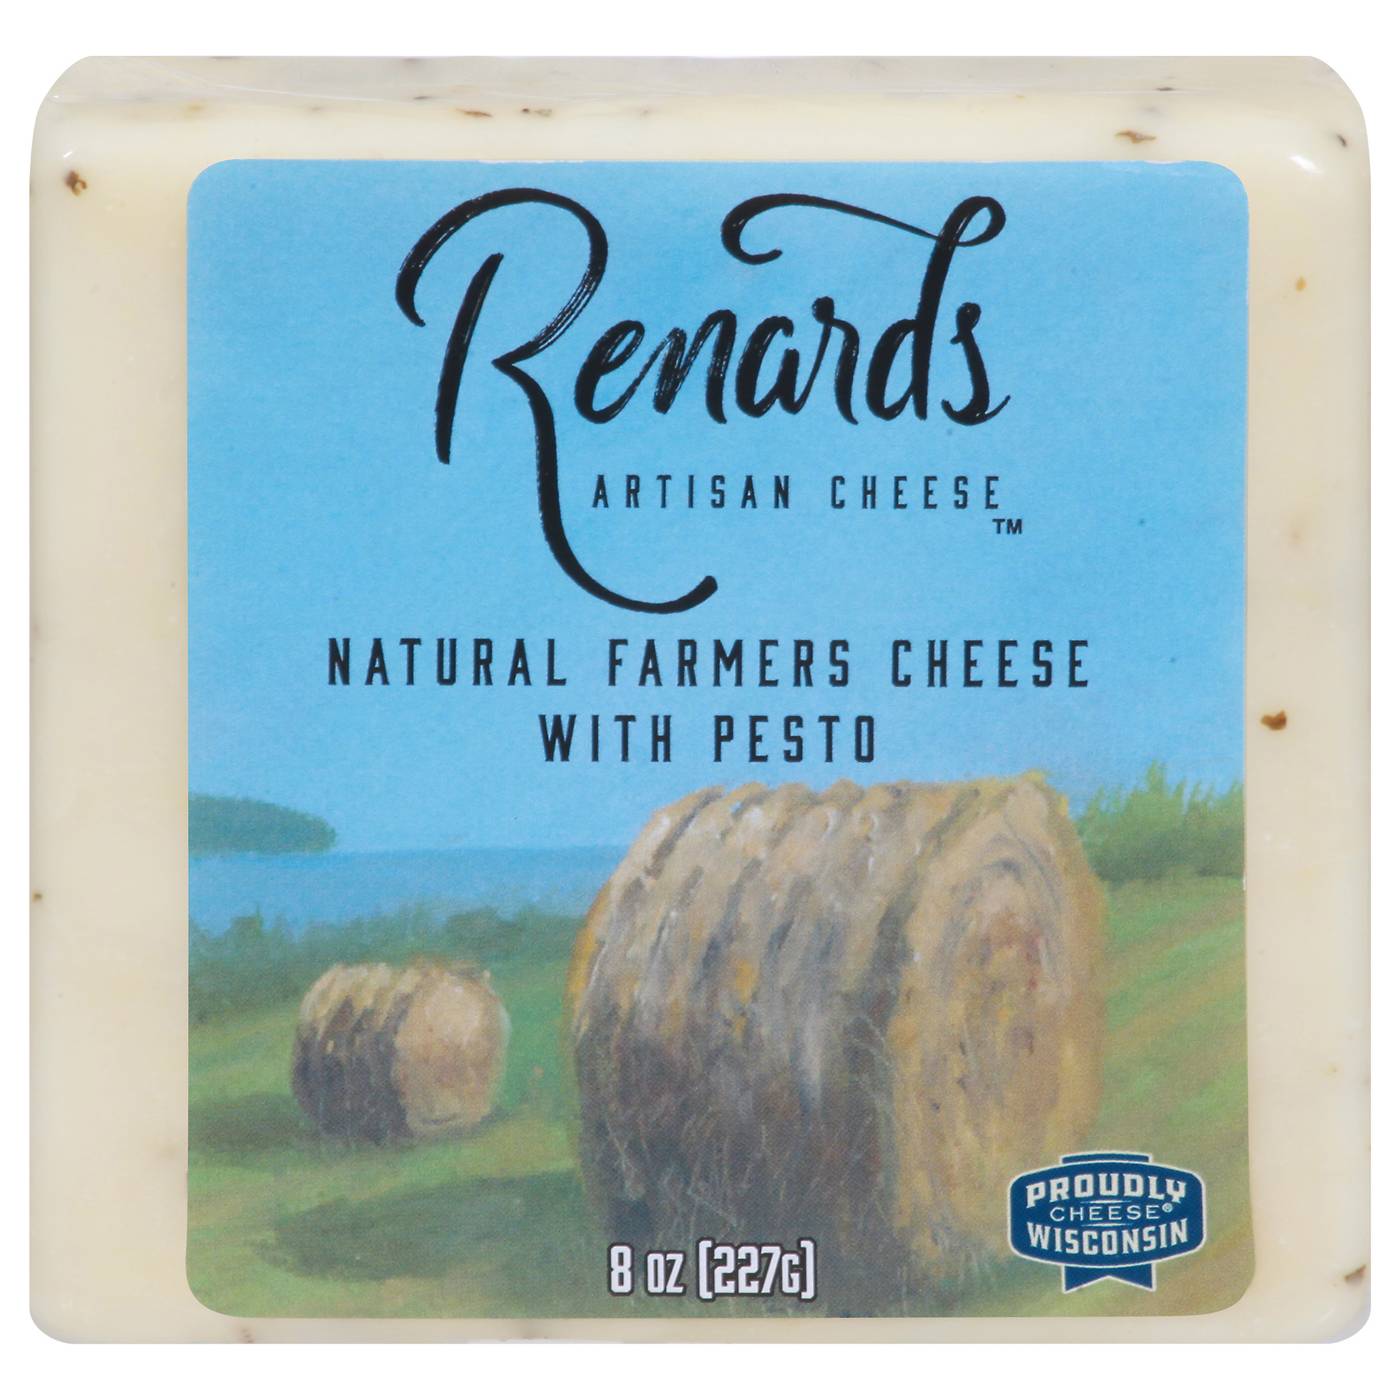 Renard's Artisan Cheese Natural Farmers Cheese with Pesto; image 1 of 3